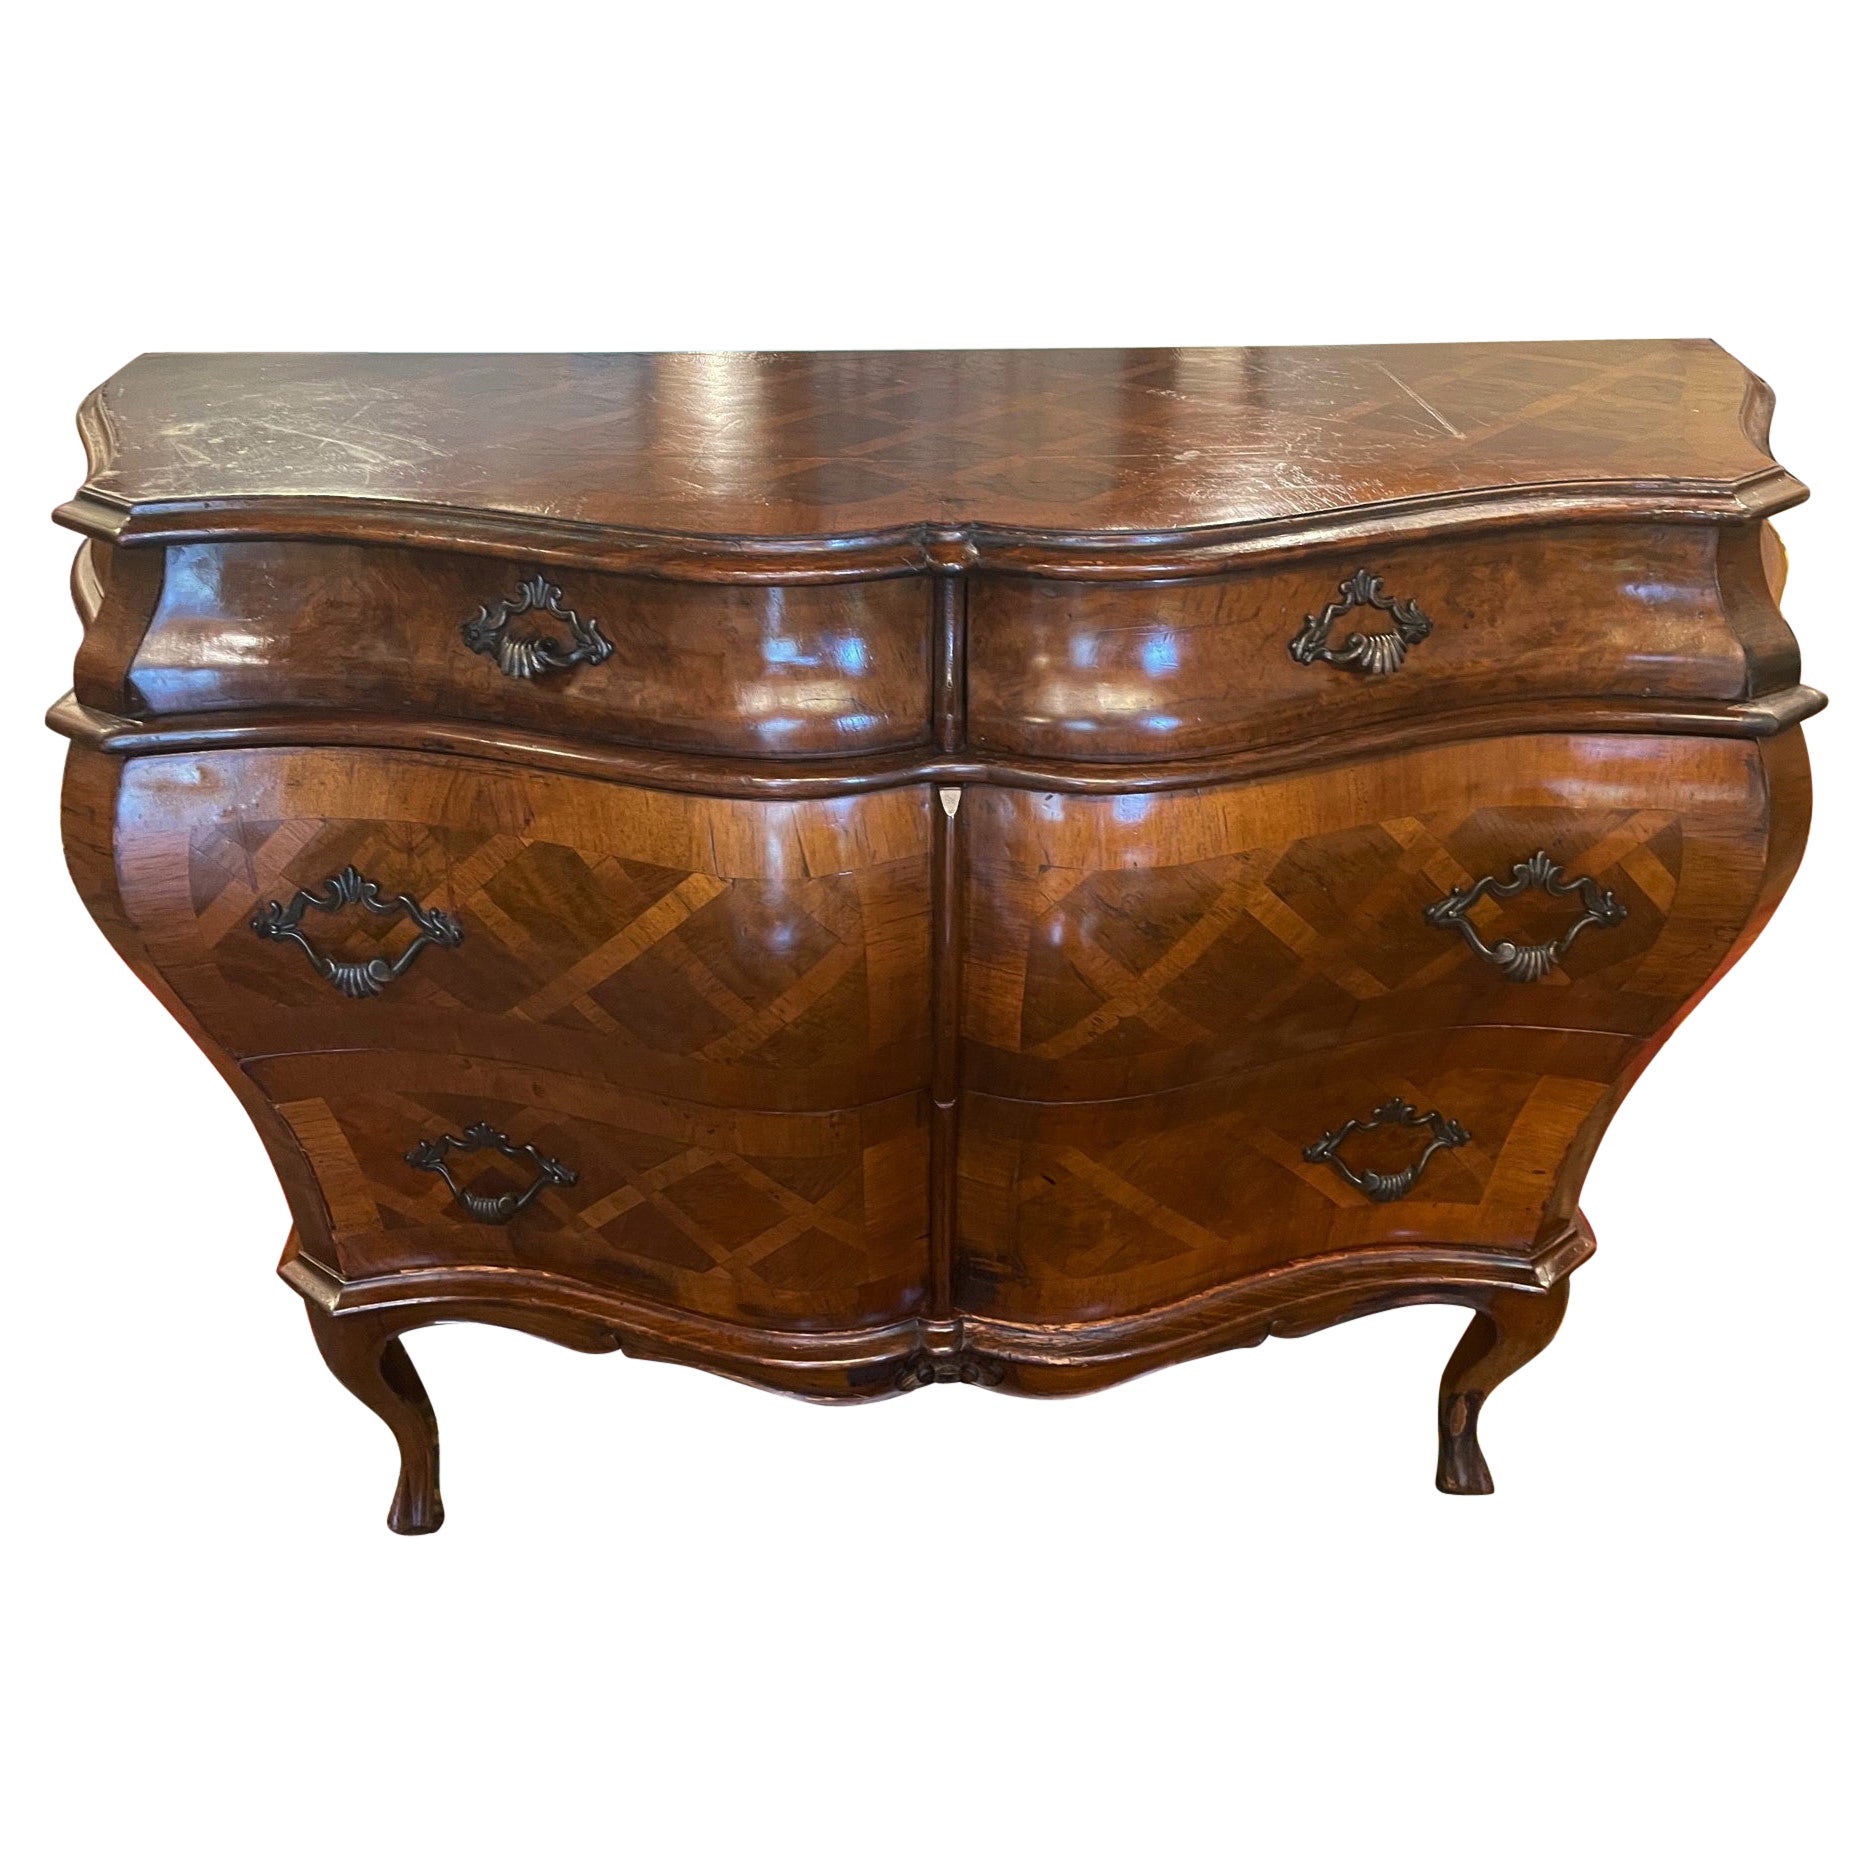 Italian Walnut Parquetry Inlaid Bombe Sided Commode, Early 20th Century For Sale